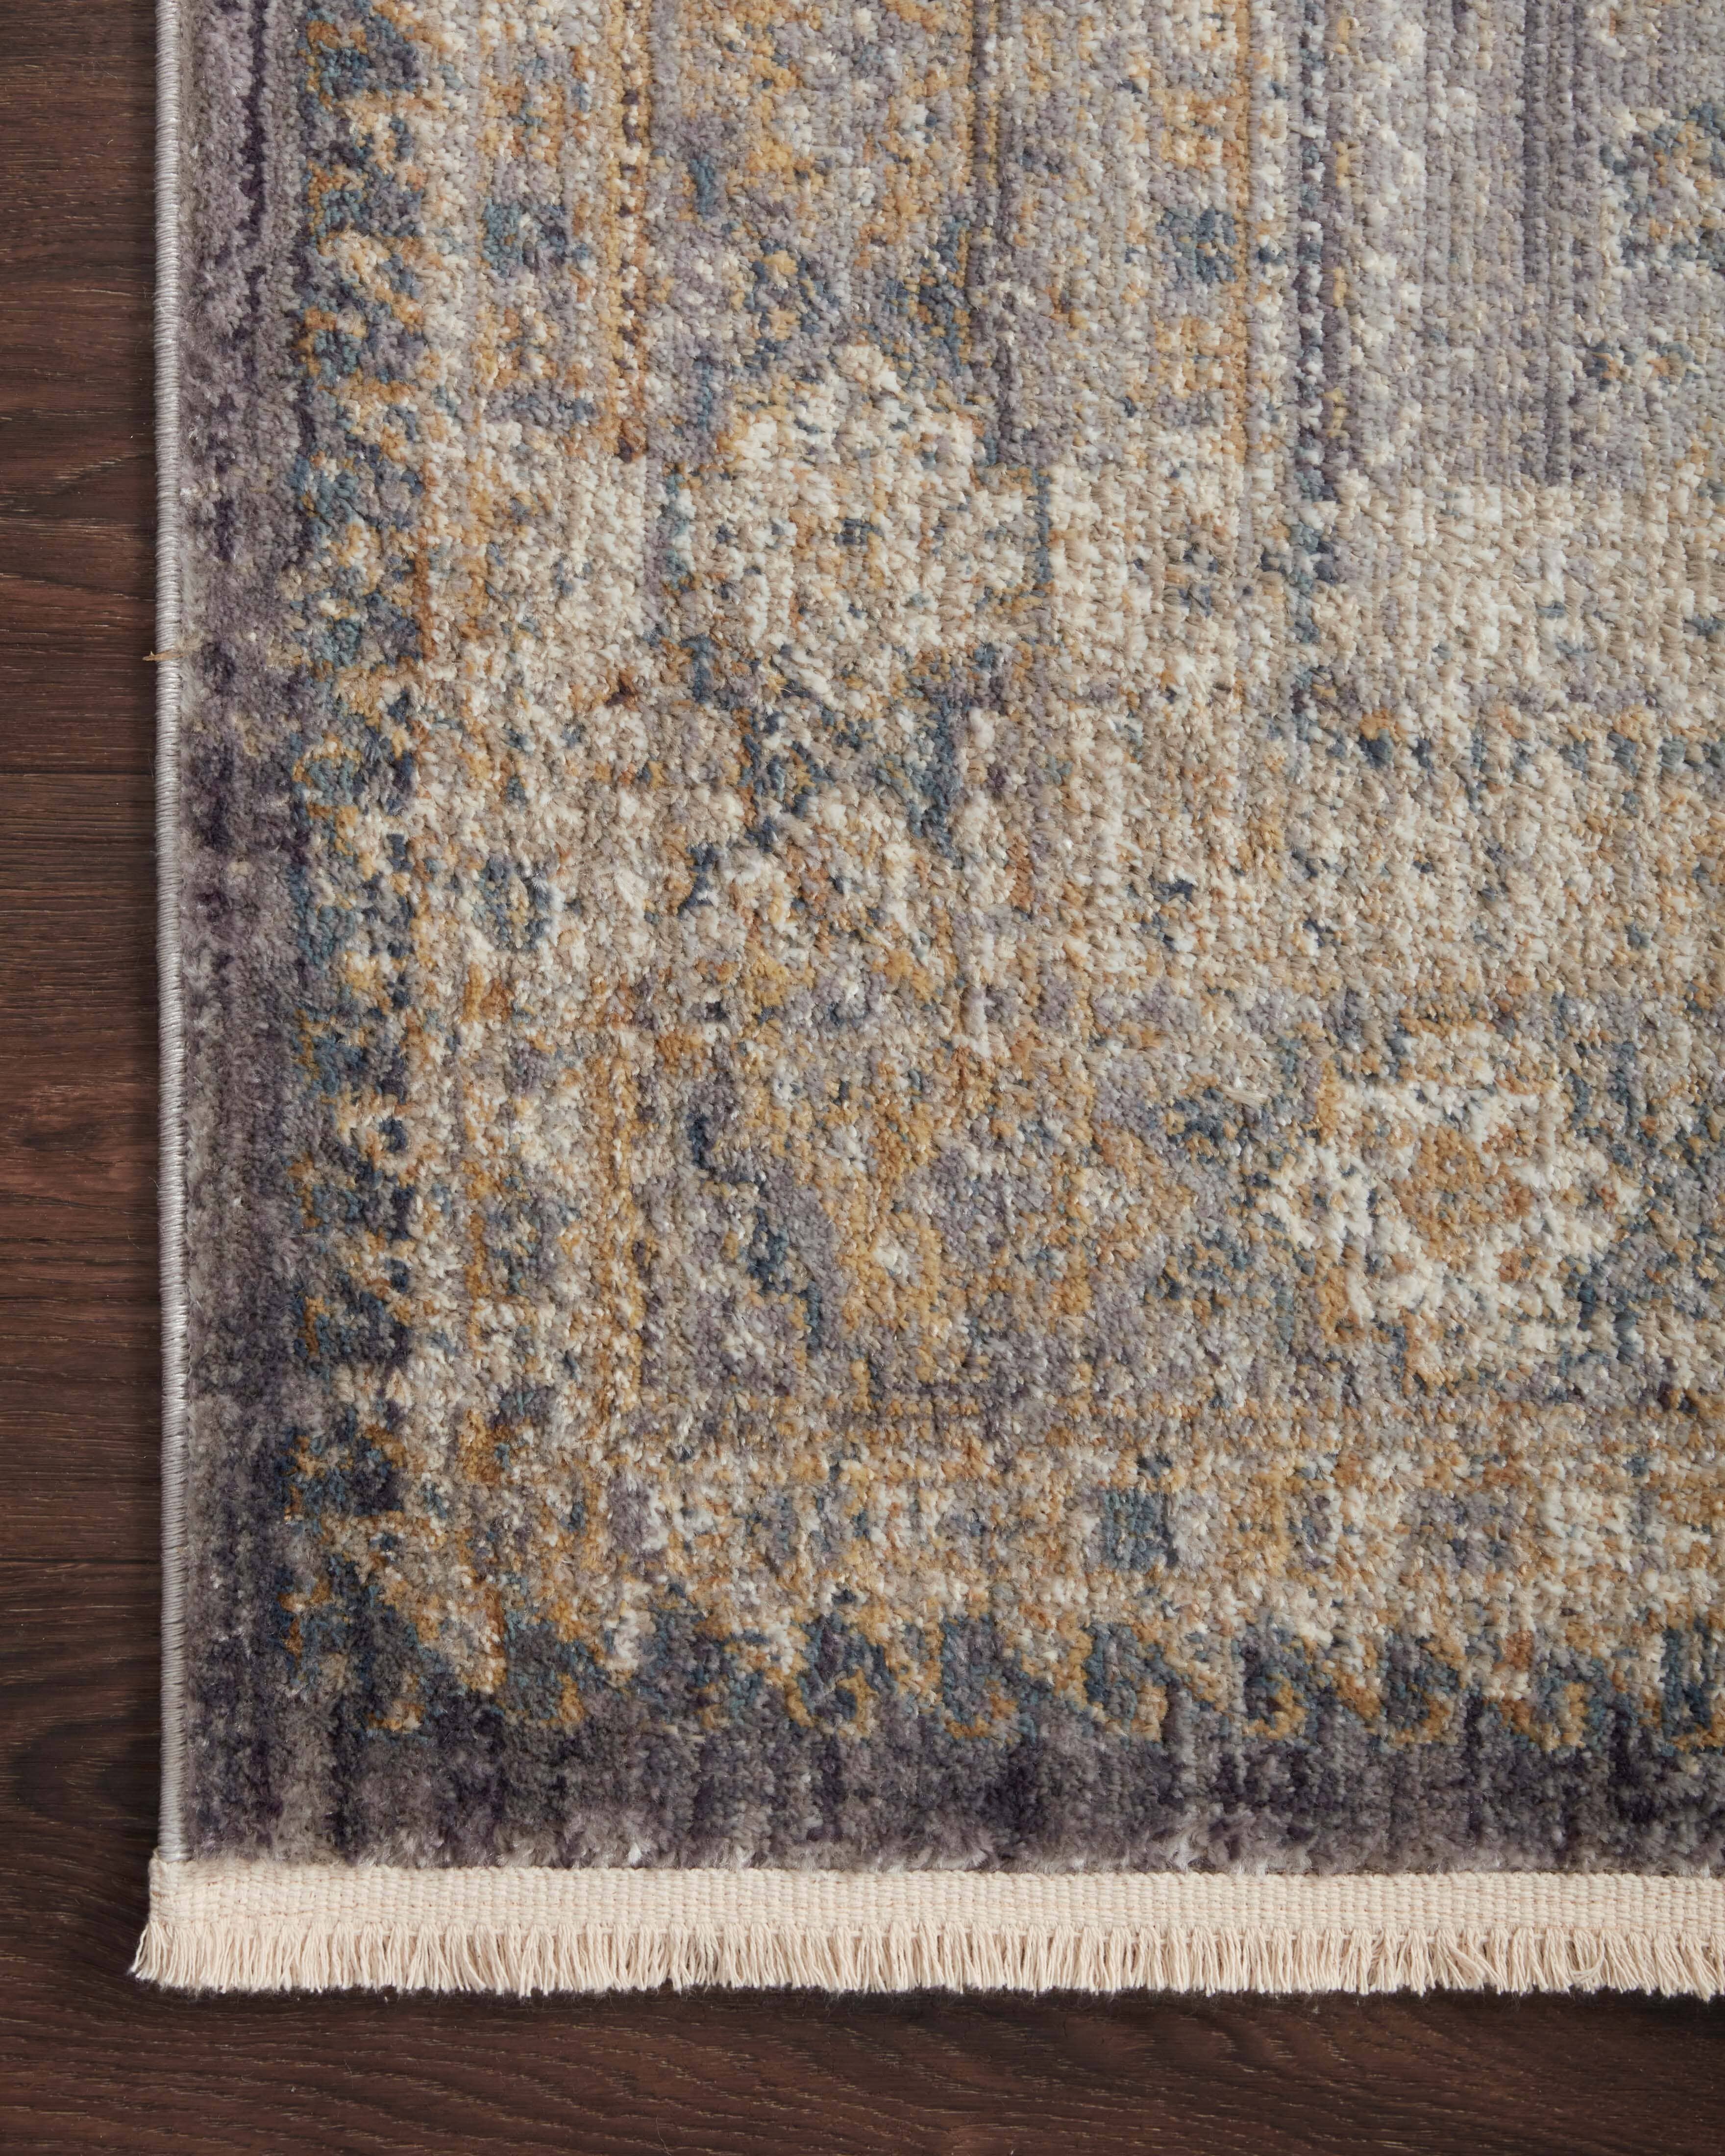 Magnolia Home by Joanna Gaines x Loloi Janey Rug | Slate / Gold Magnolia Home by Joanna Gaines x Loloi